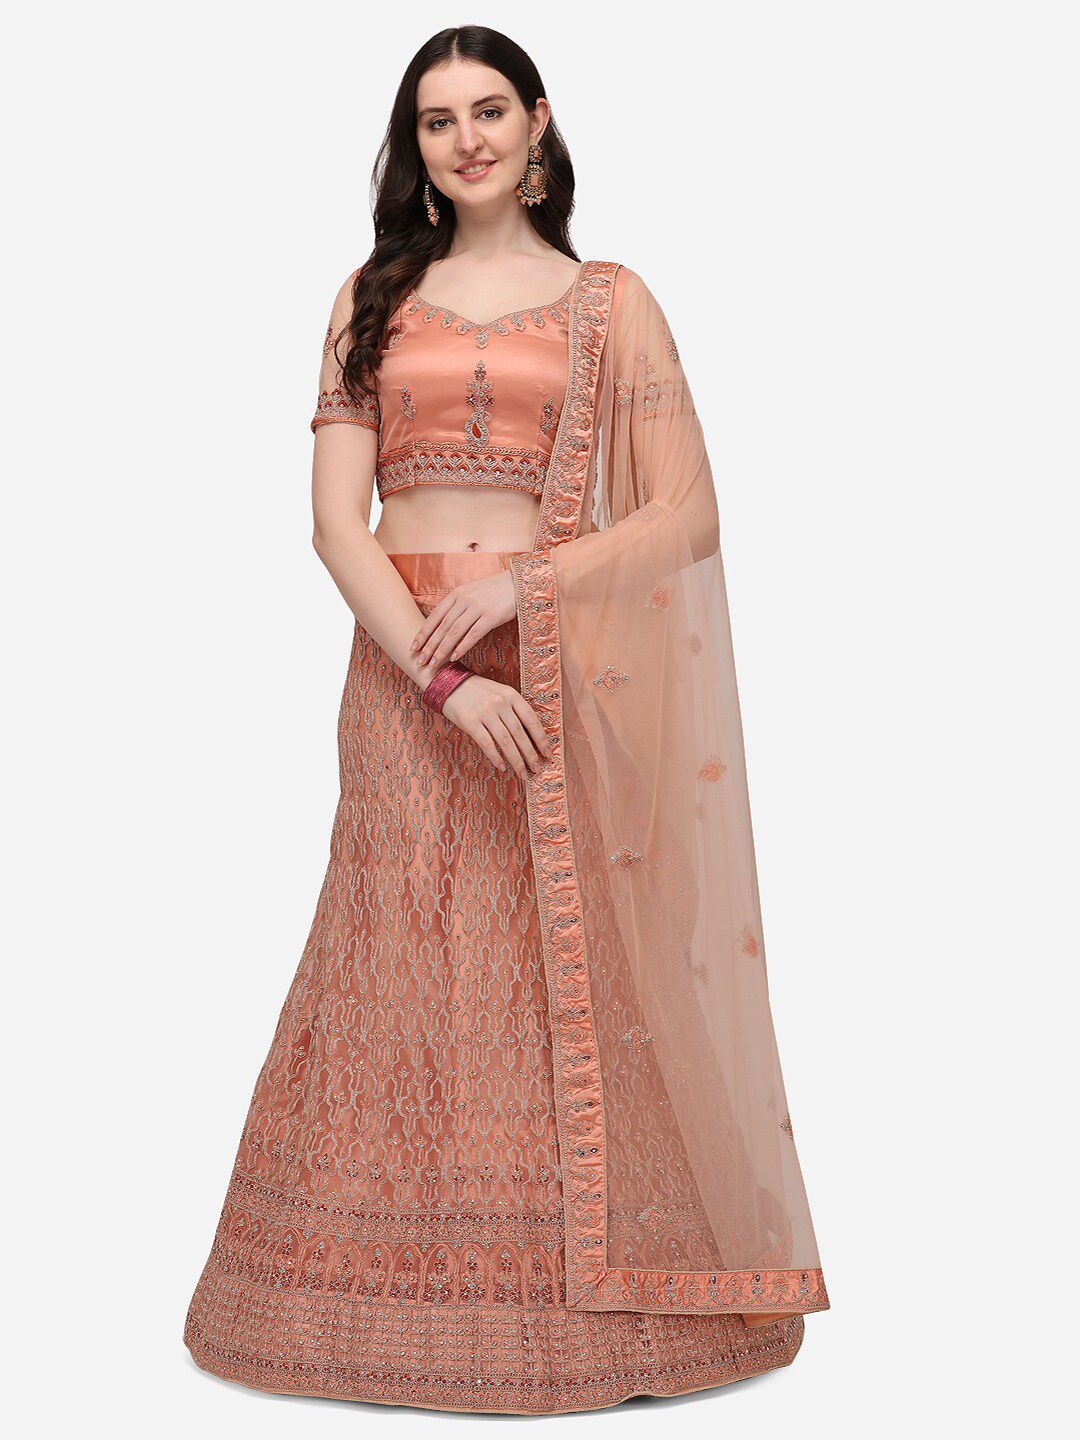 VRSALES Peach-Coloured & Maroon Embroidered Semi-Stitched Lehenga & Unstitched Blouse With Dupatta Price in India